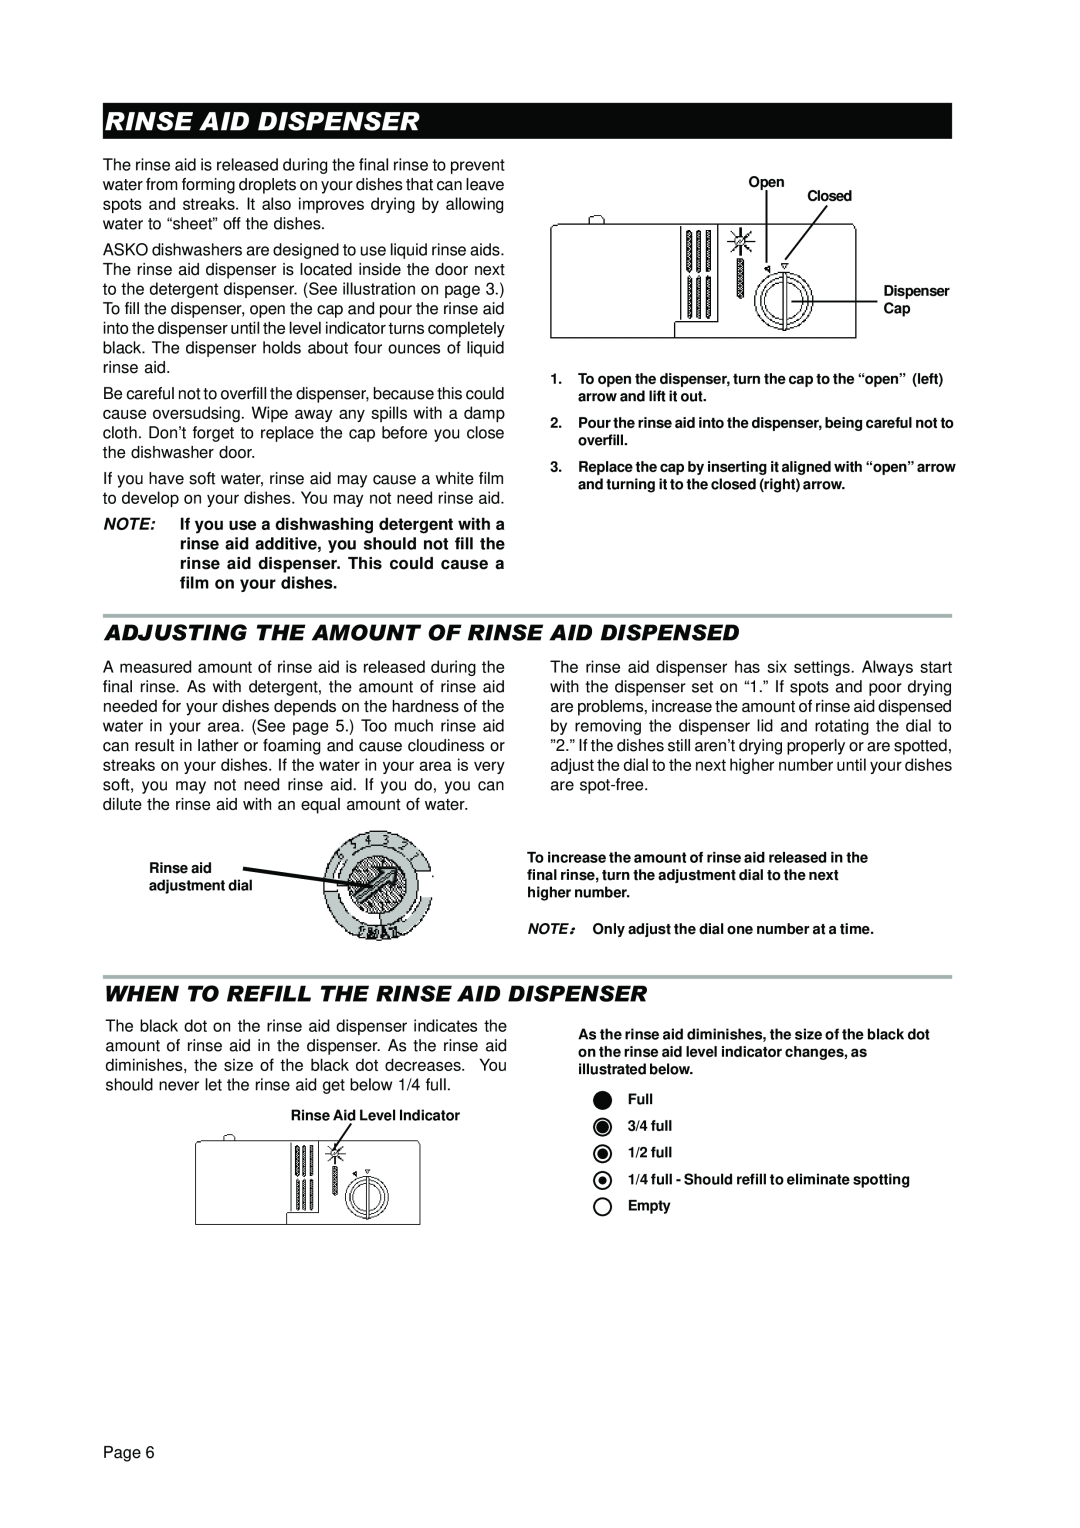 Asko D3250 operating instructions Adjusting The Amount Of Rinse Aid Dispensed, When To Refill The Rinse Aid Dispenser 